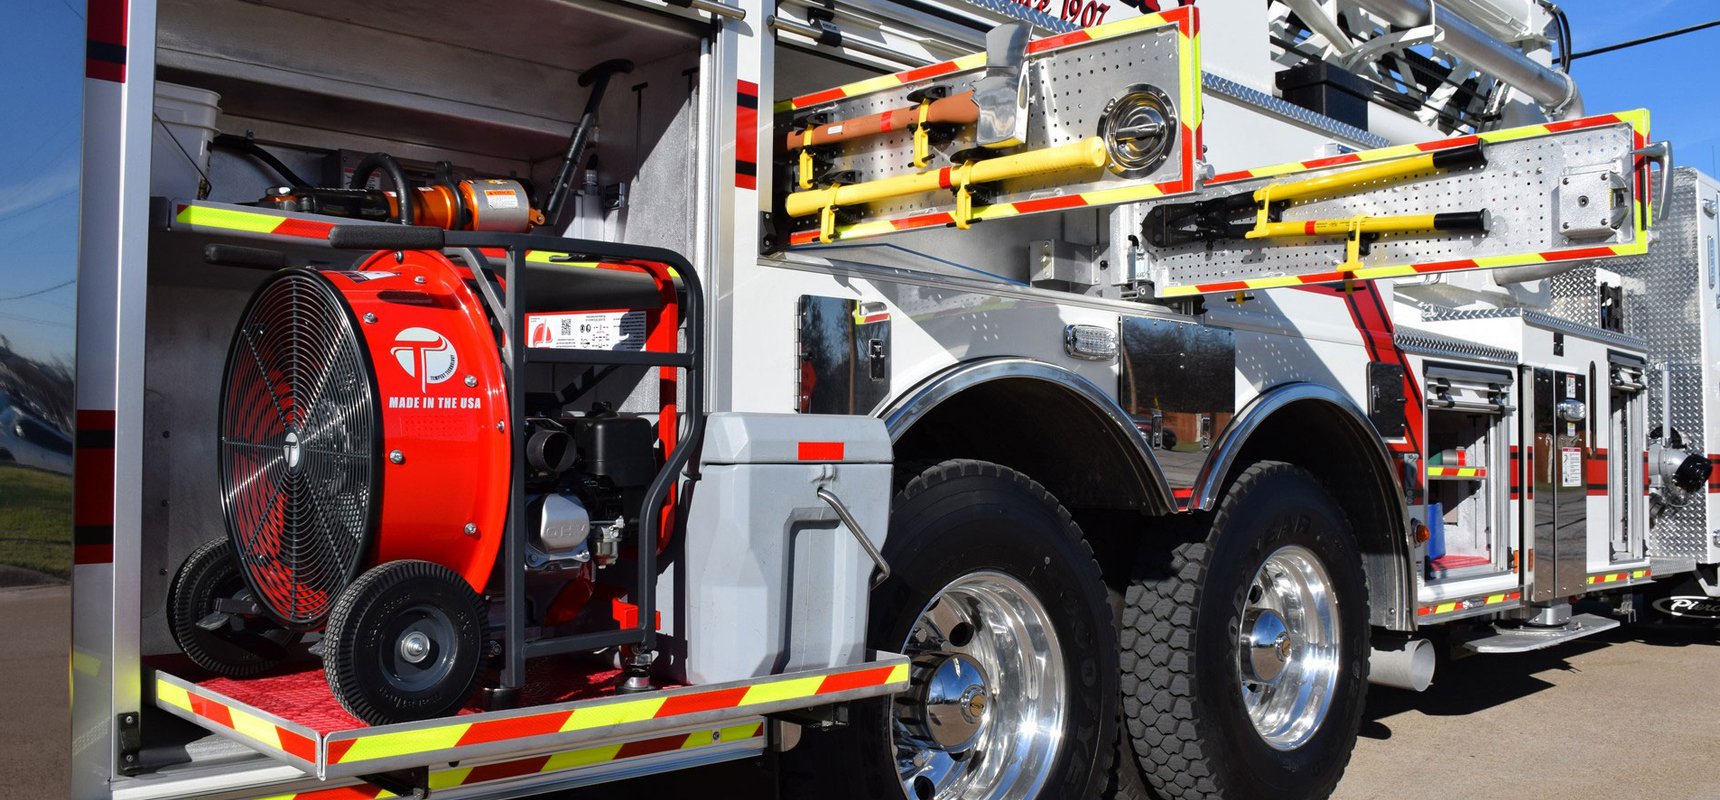 7 Tips to Maximize Aerial Fire Truck Storage